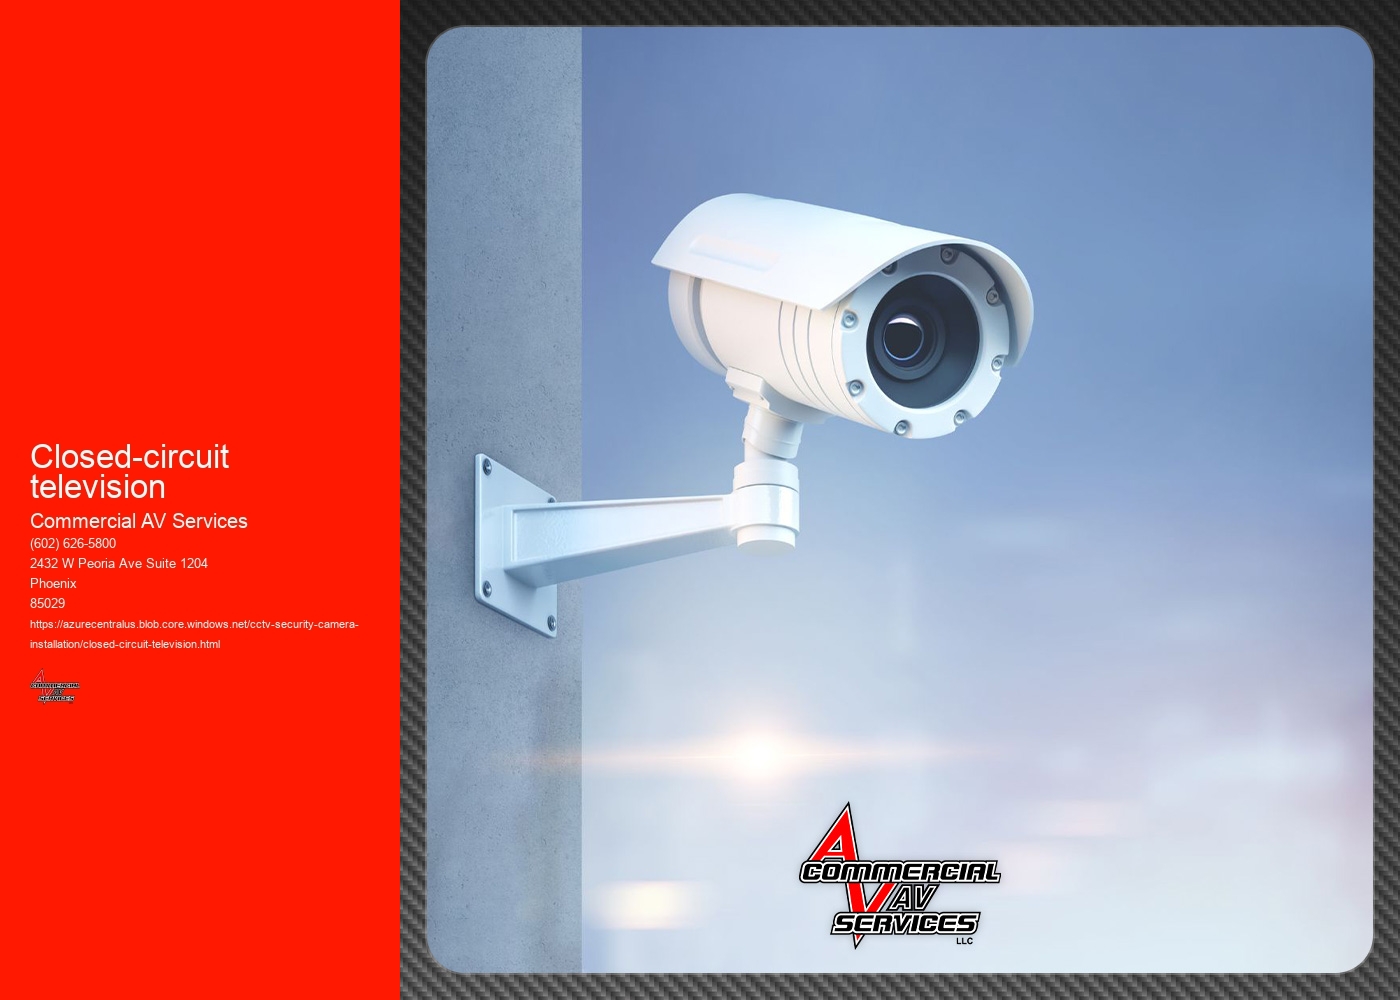 How does remote monitoring and mobile access work with CCTV systems, and what are the benefits for homeowners?